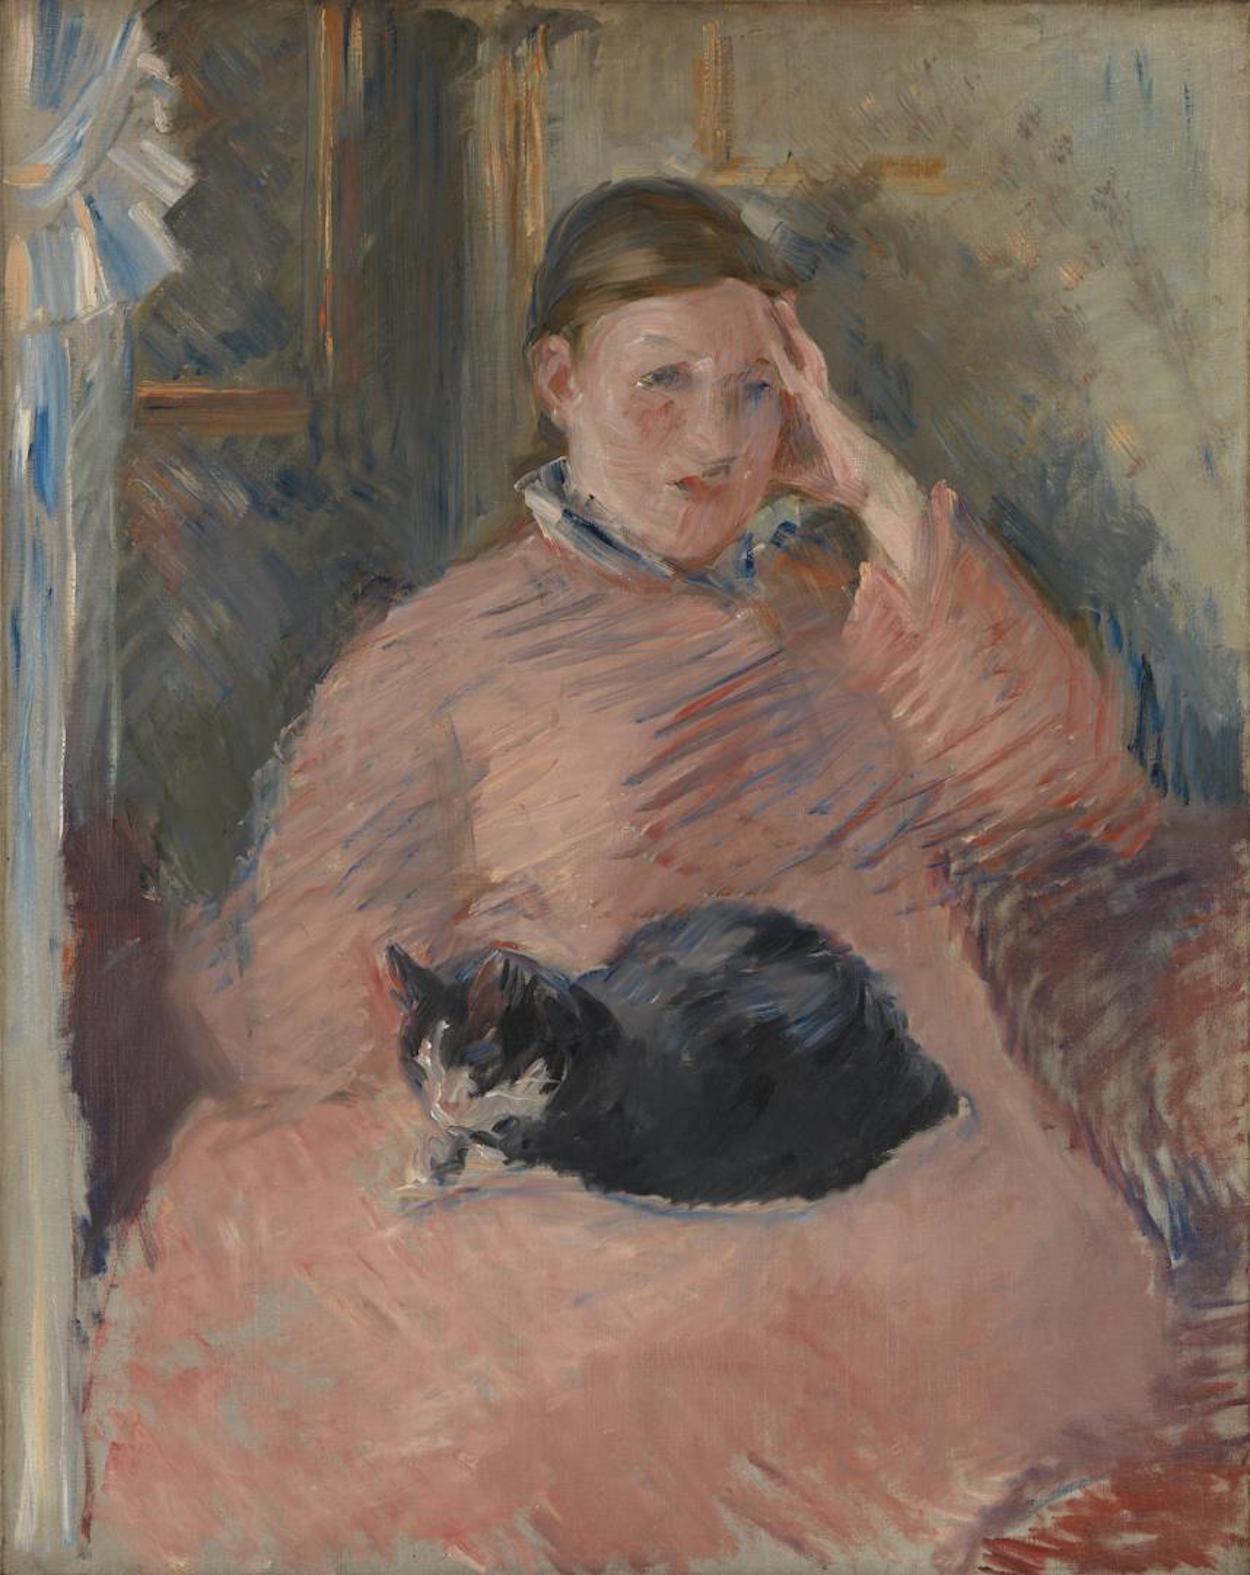 Woman With a Cat by Édouard Manet - 1880-2 - 92.1 × 73 cm National Gallery